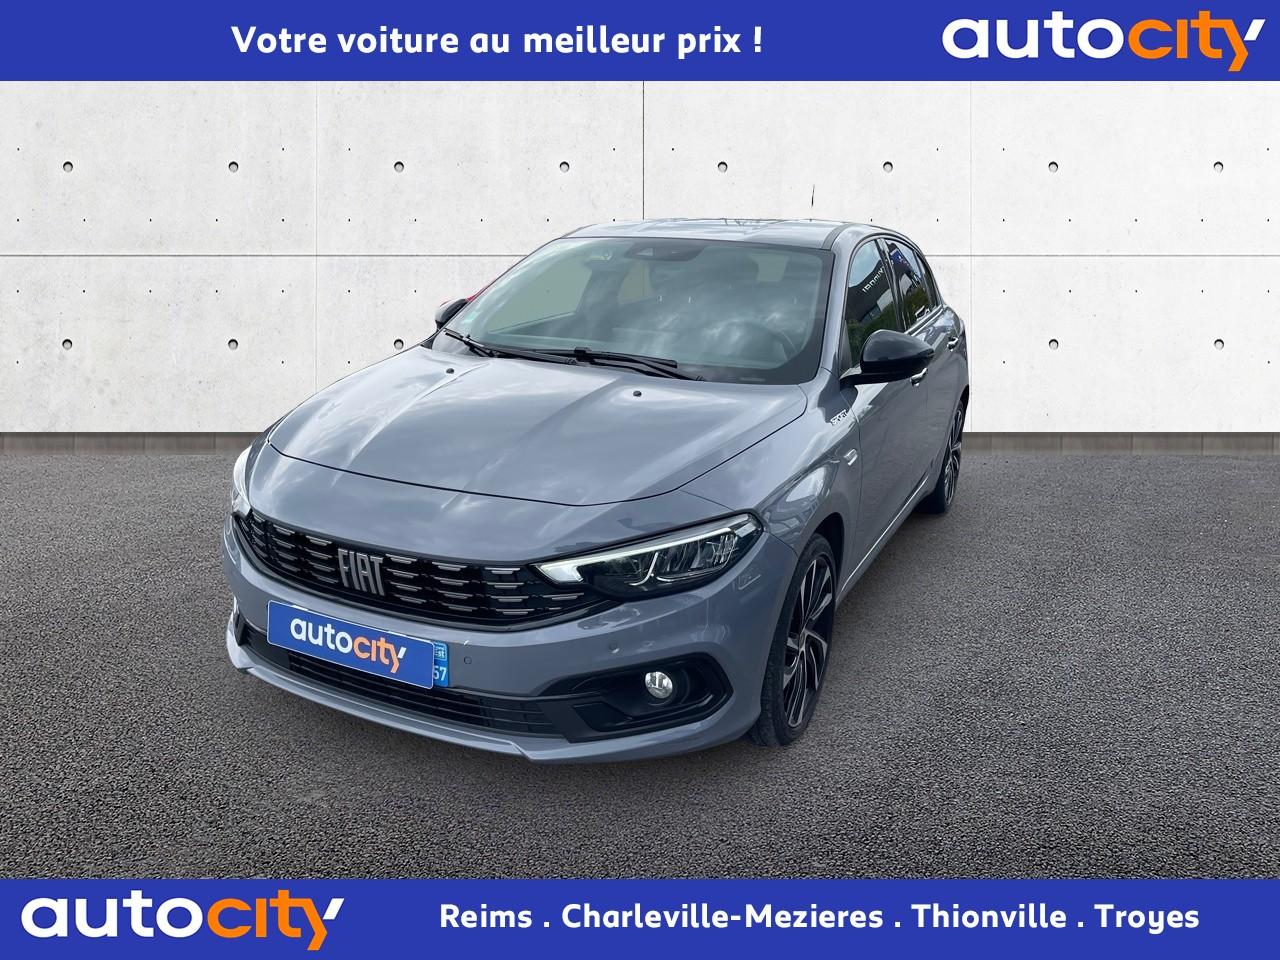 FIAT-TIPO-Tipo 1.6 MultiJet - 130 S&S 2021  5P 2016 BERLINE Sport PHASE 2